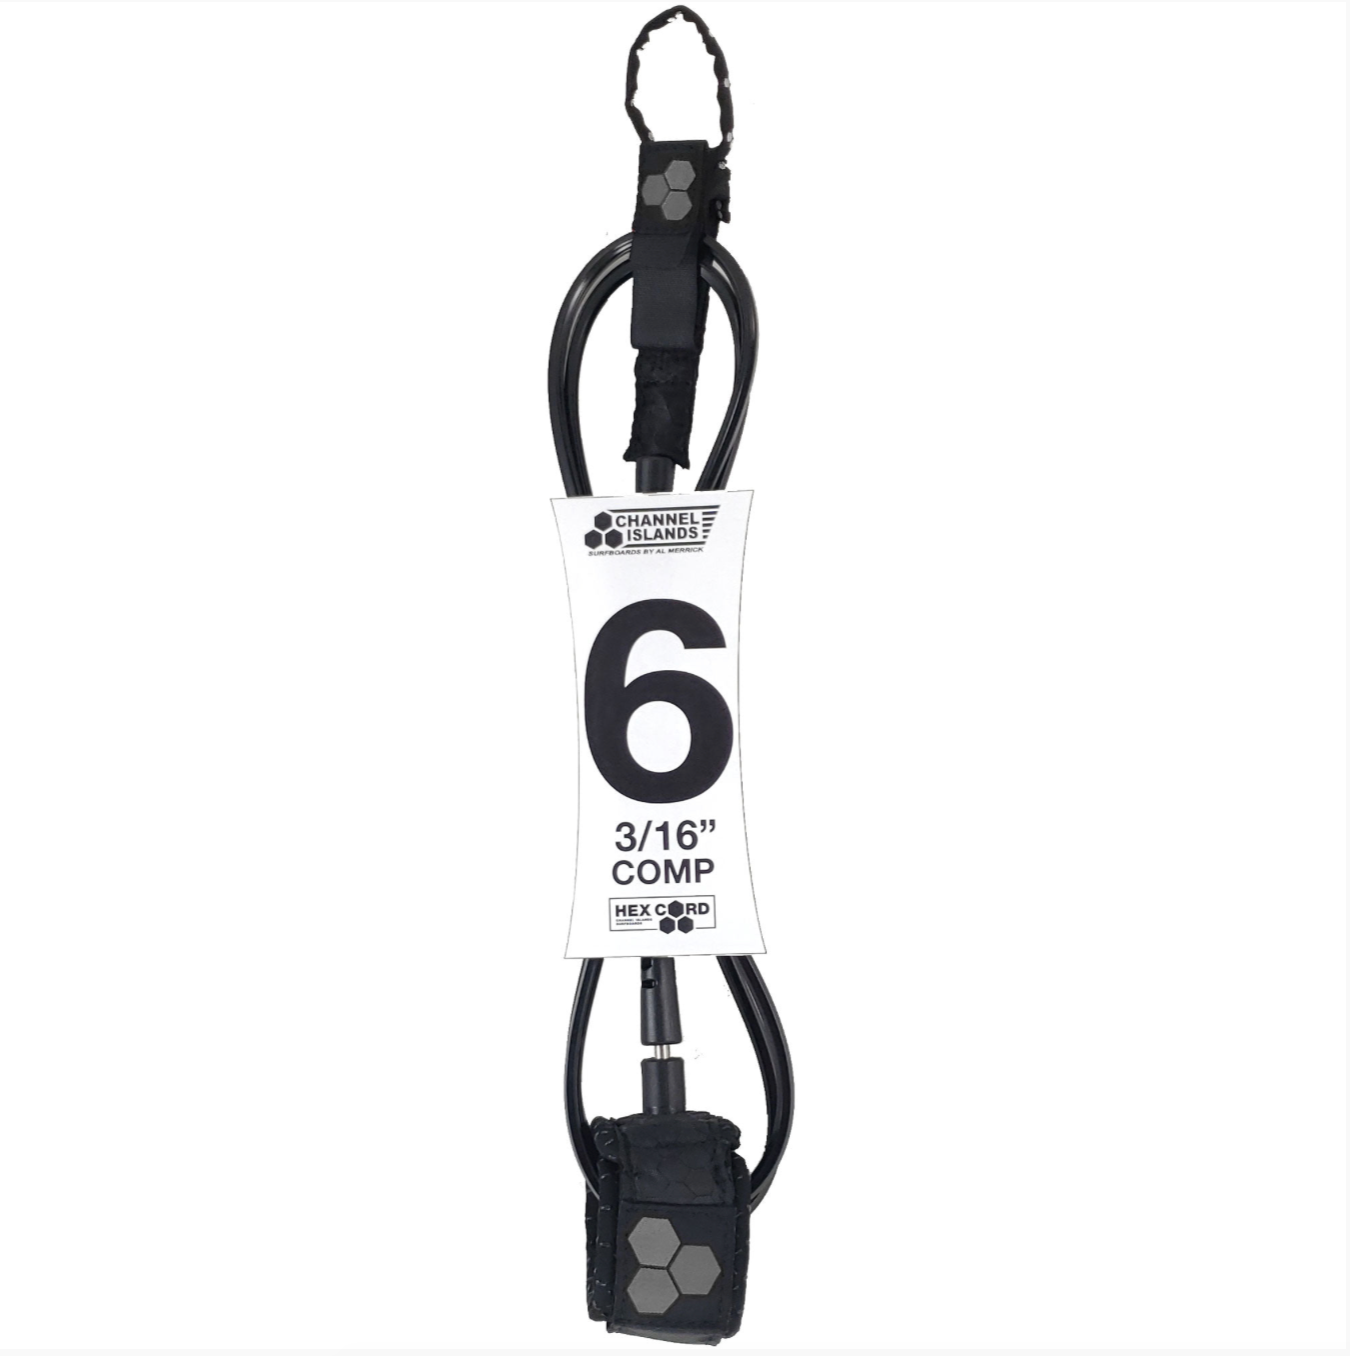 CHANNEL ISLANDS   COMP HEX CORD LEASH  6' 6MM